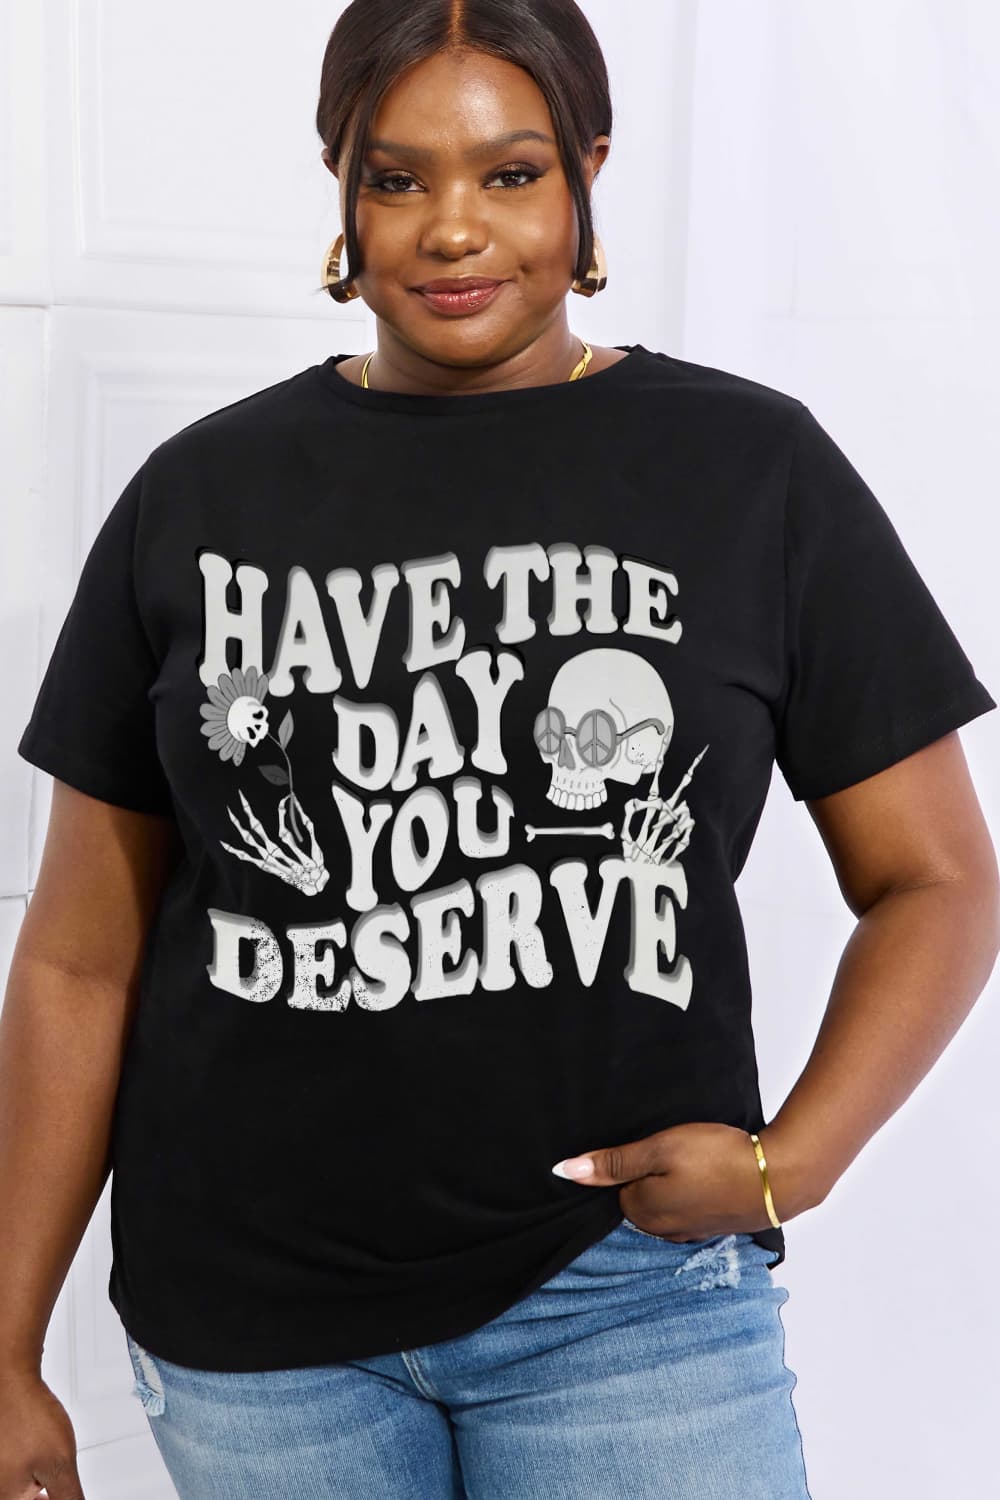 Simply Love Graphic T-shirts Black / S Full Size HAVE THE DAY YOU DESERVE Graphic Cotton Tee